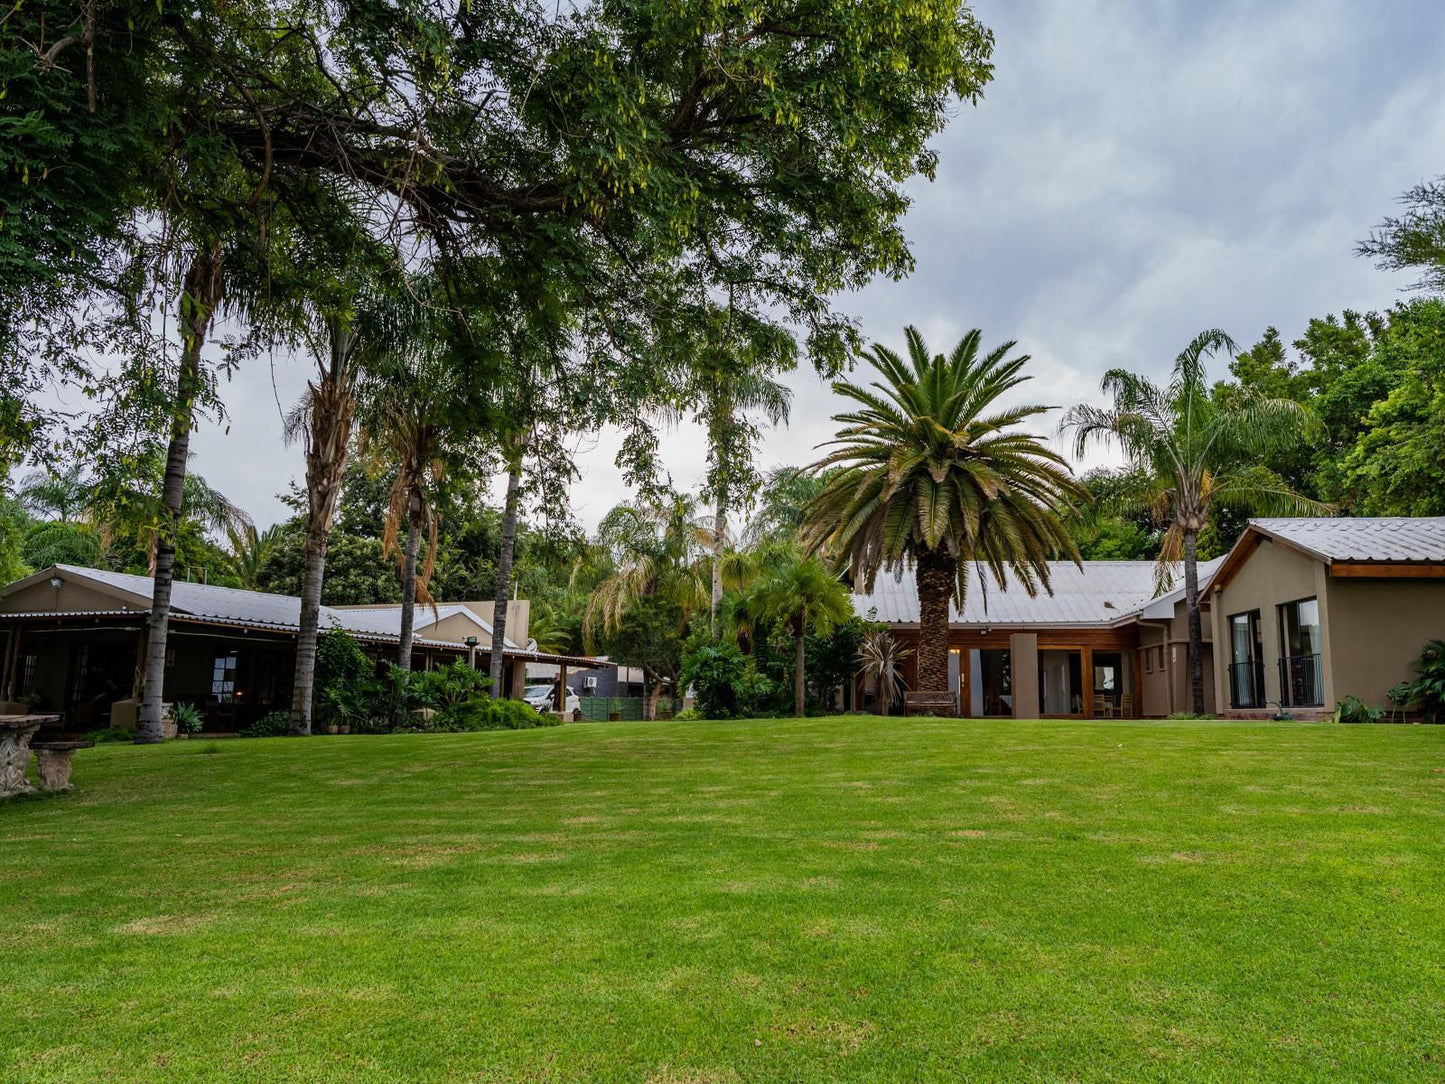 River Bank Lodge Upington Northern Cape South Africa House, Building, Architecture, Palm Tree, Plant, Nature, Wood